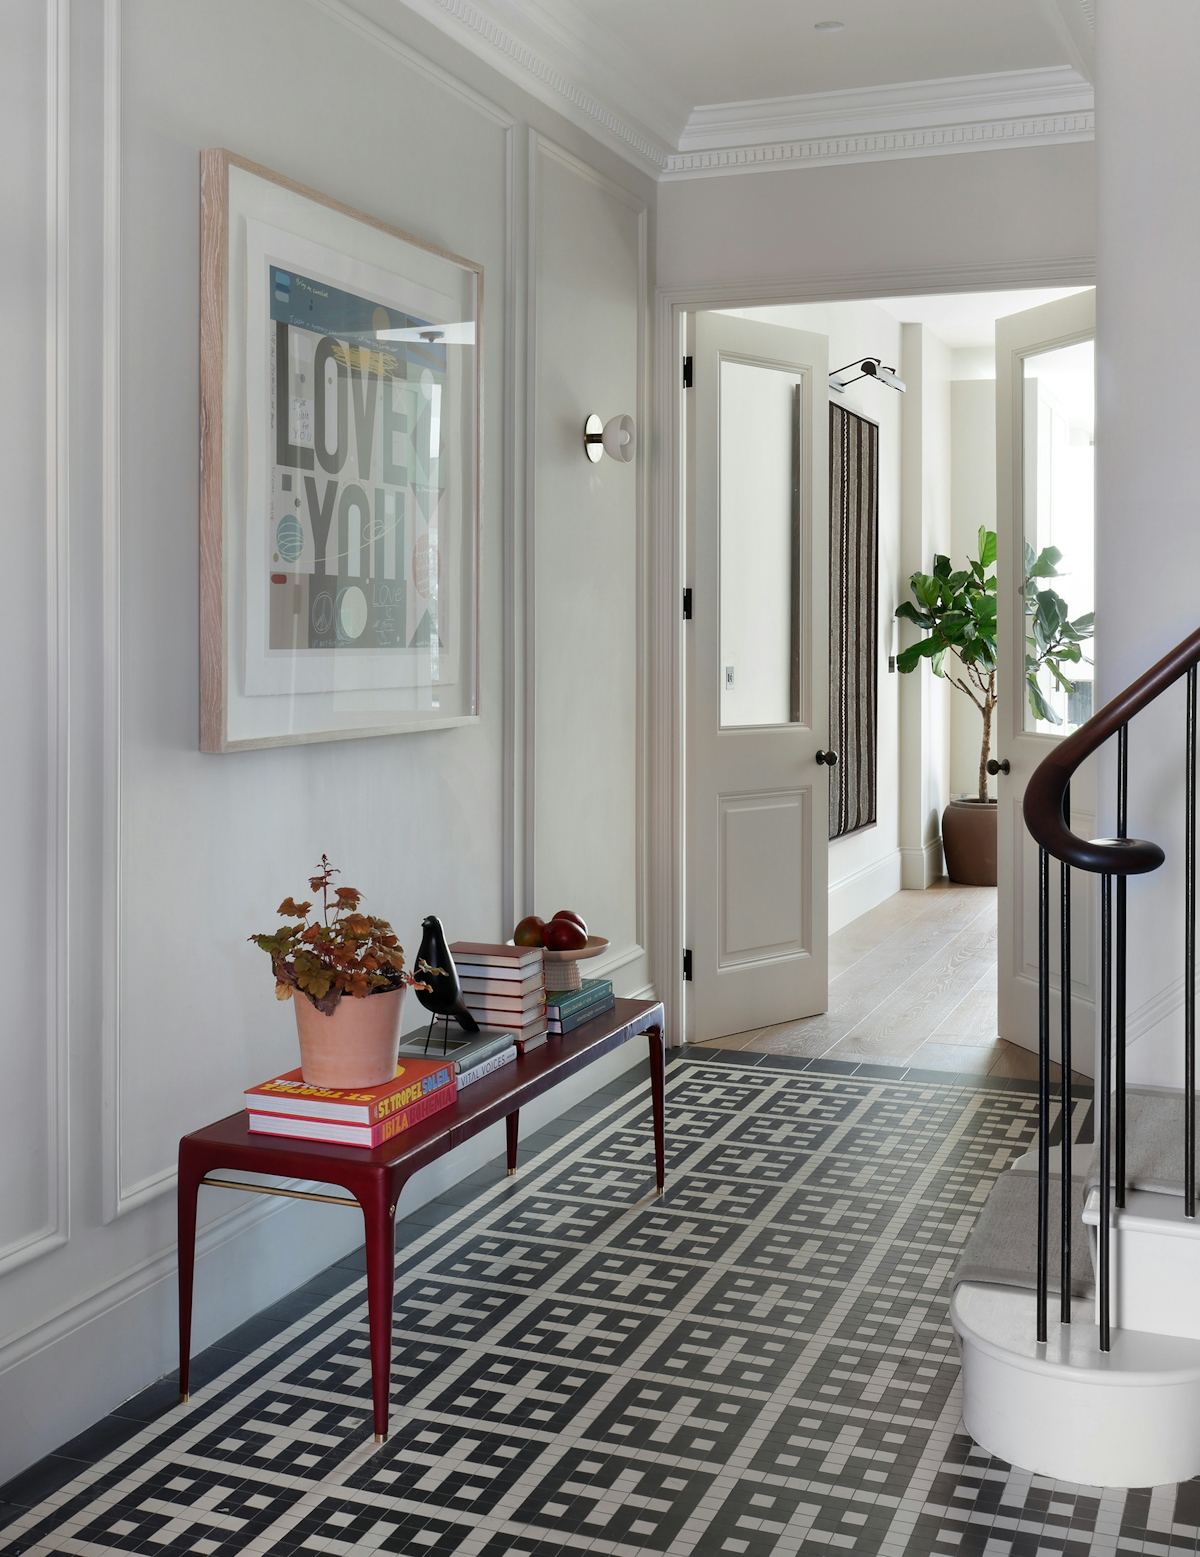 8 Essential Tips for Designing the Perfect Entryway | LuxDeco.com | Christian Bense